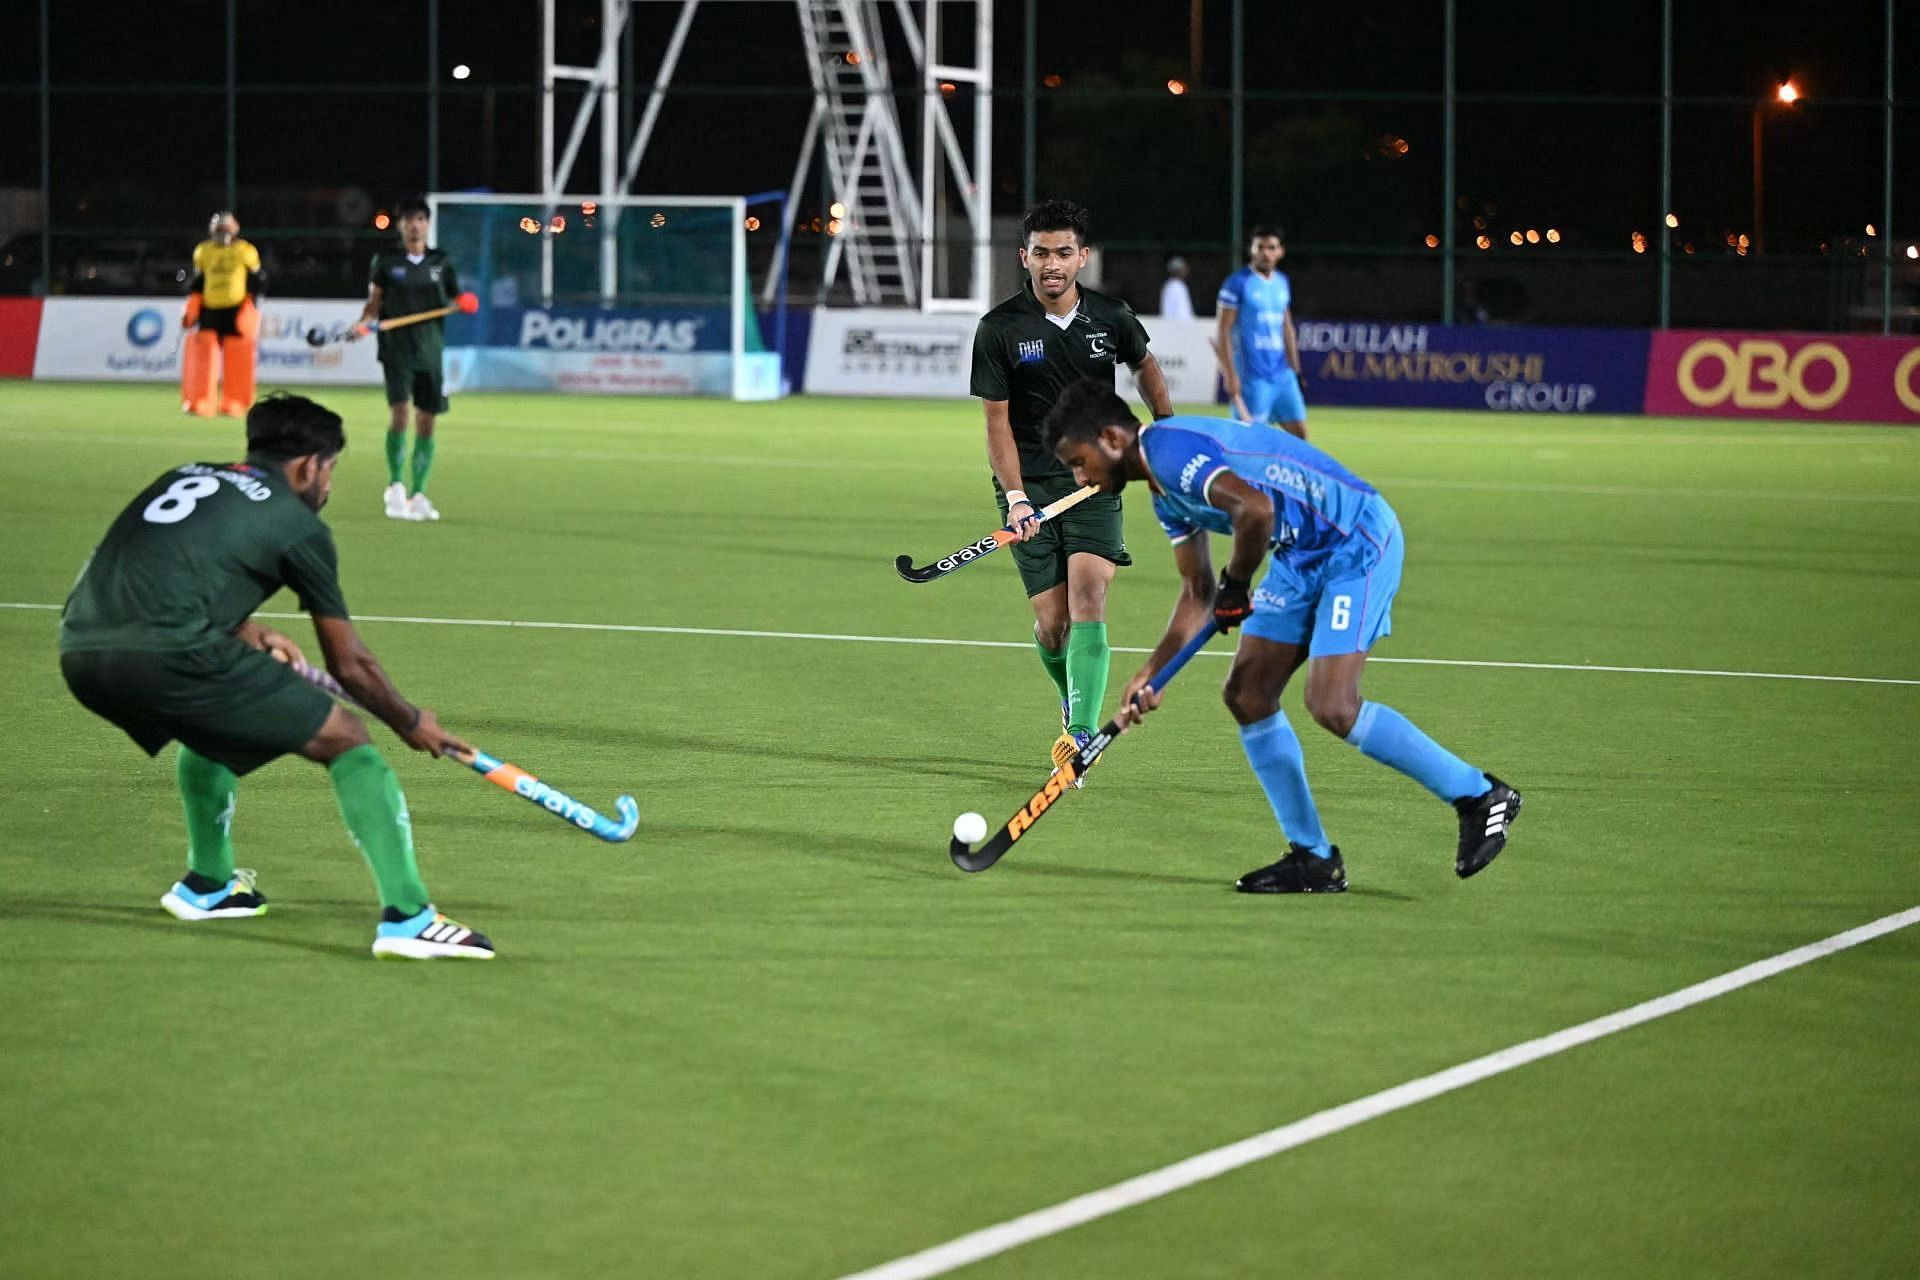 Uttam Singh in action against Pakistan at the Asia Cup